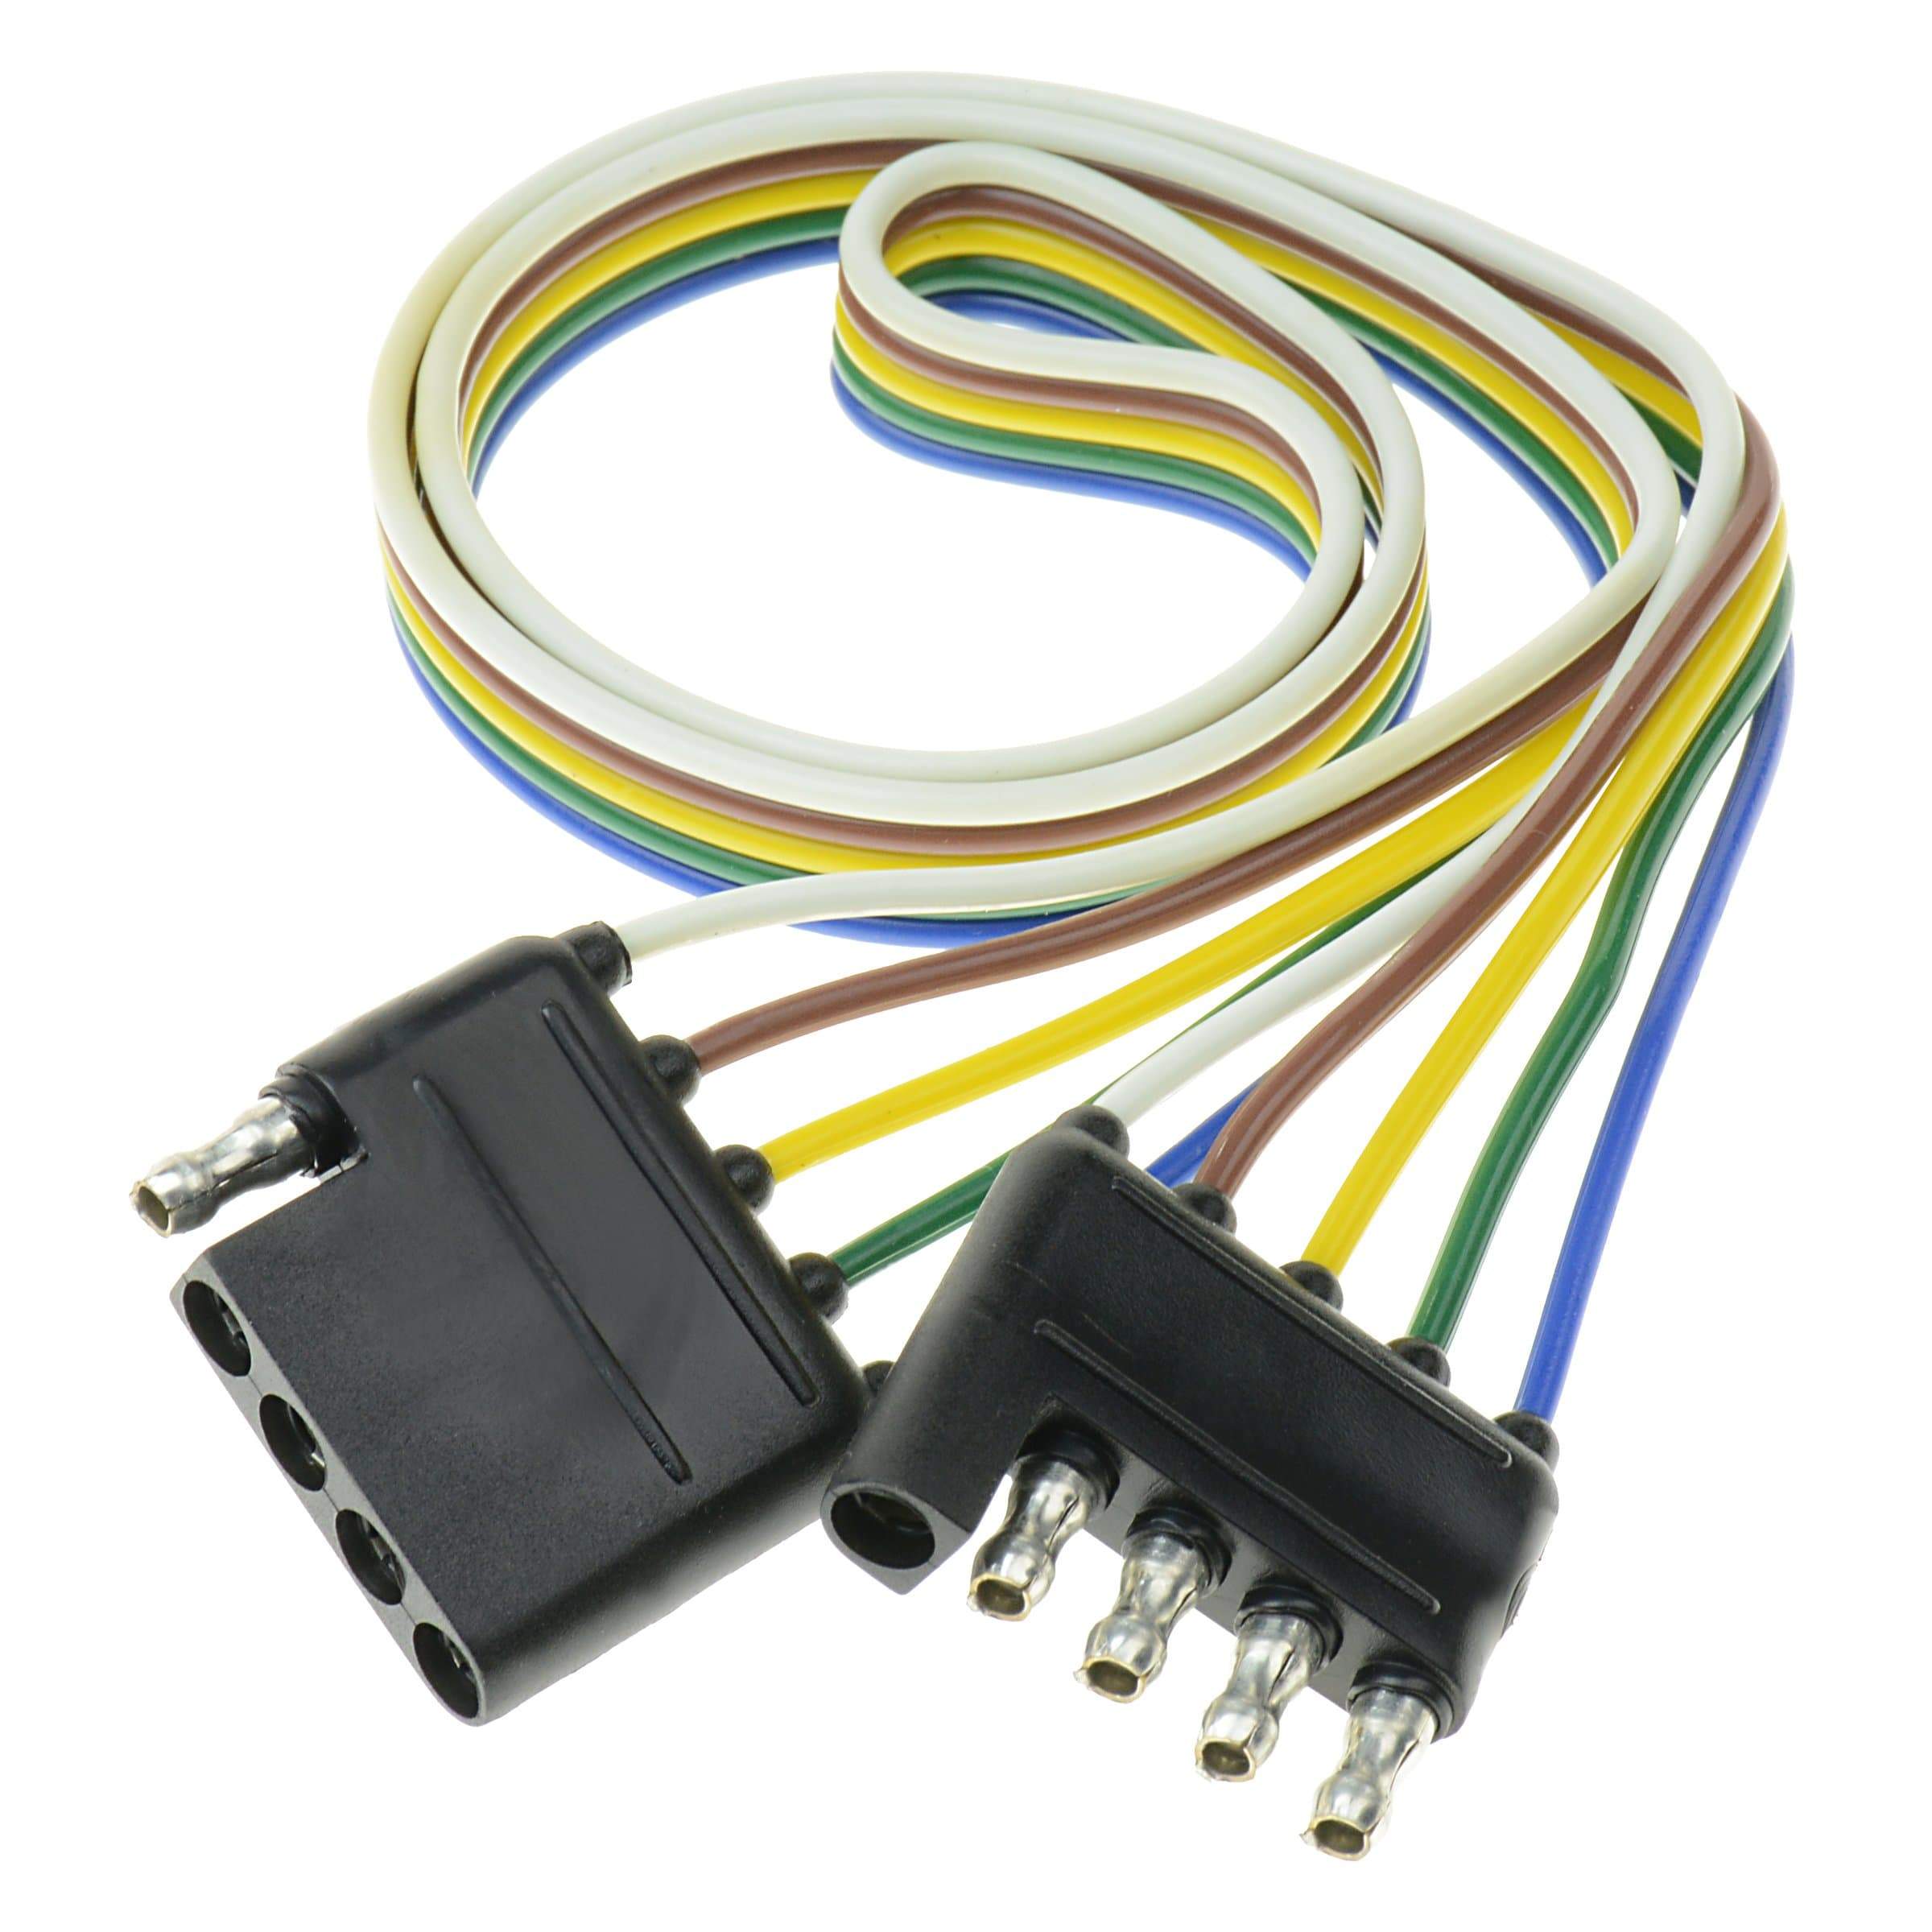 25' 4 Way Trailer Wiring Connection Kit Flat Wire Extension Harness+caps